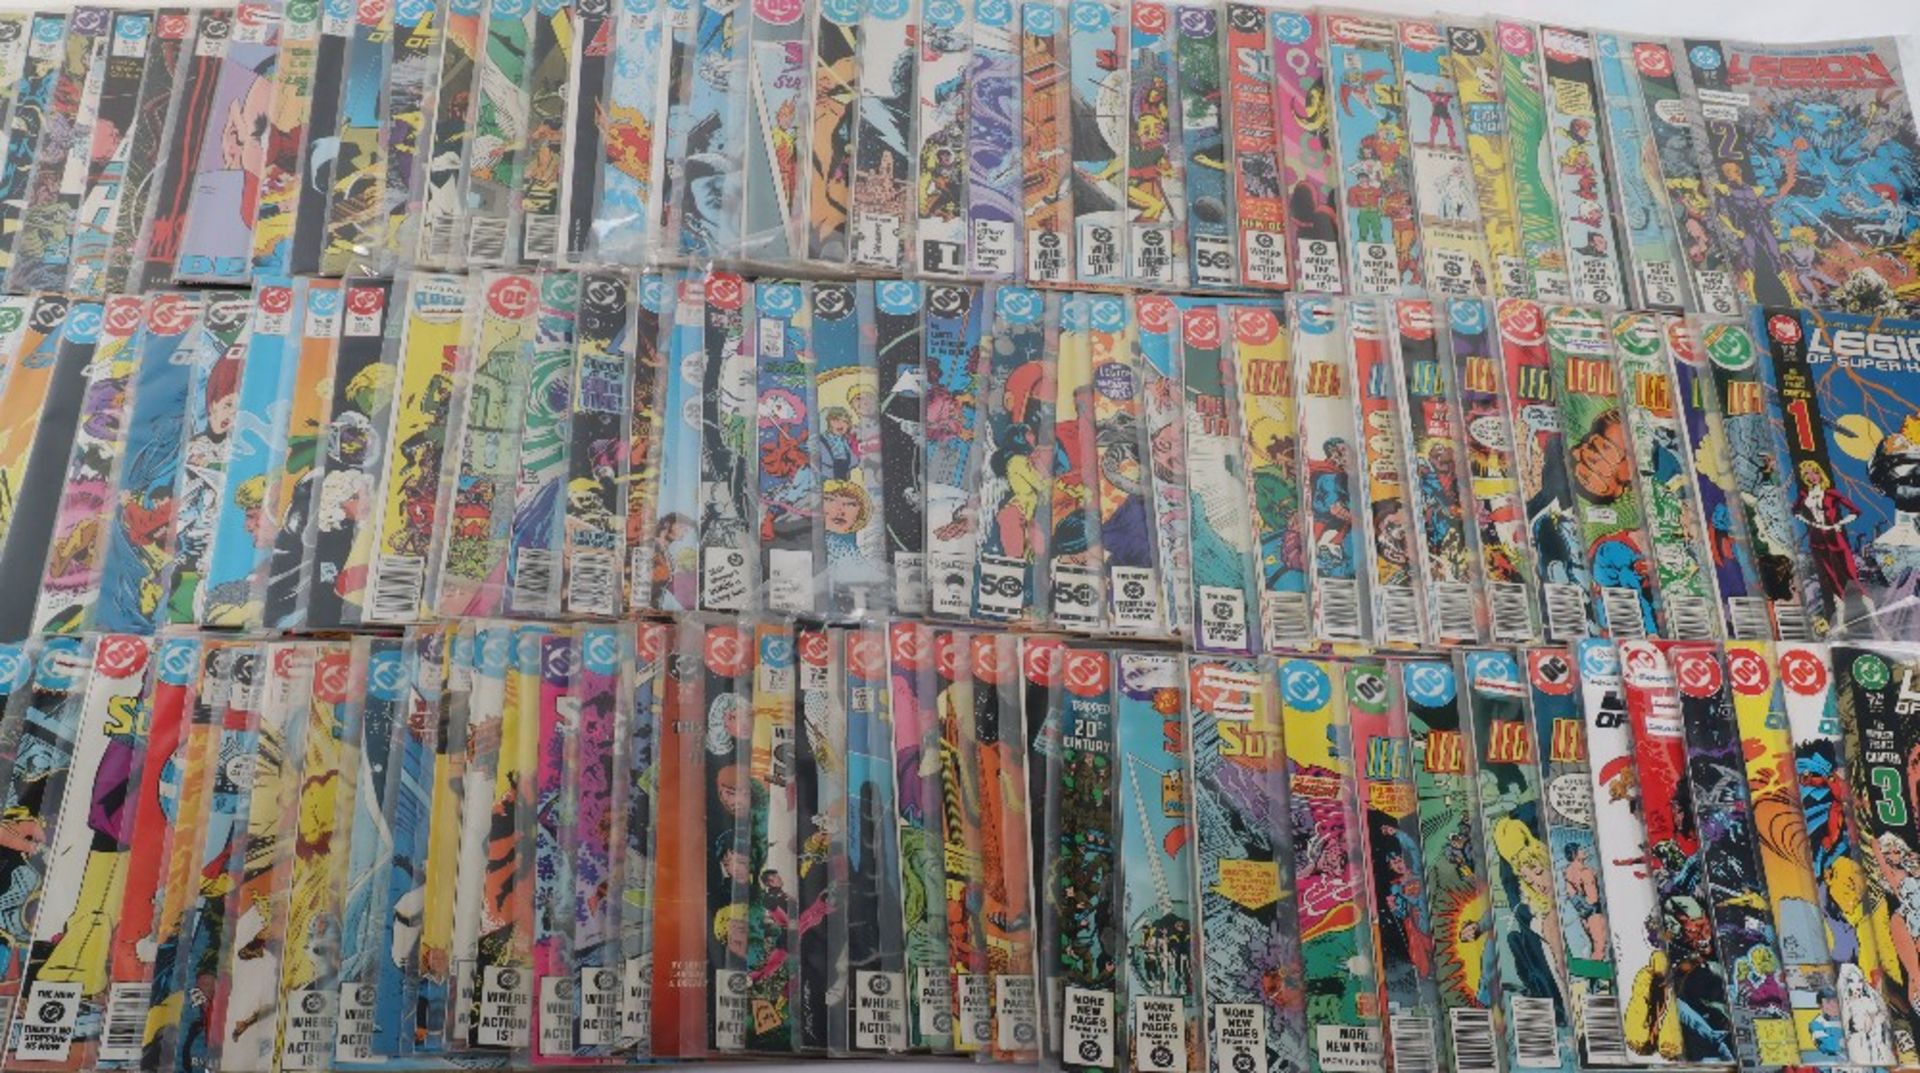 Collection of DC comics “legion of super-heroes” mixed ages - Image 2 of 3